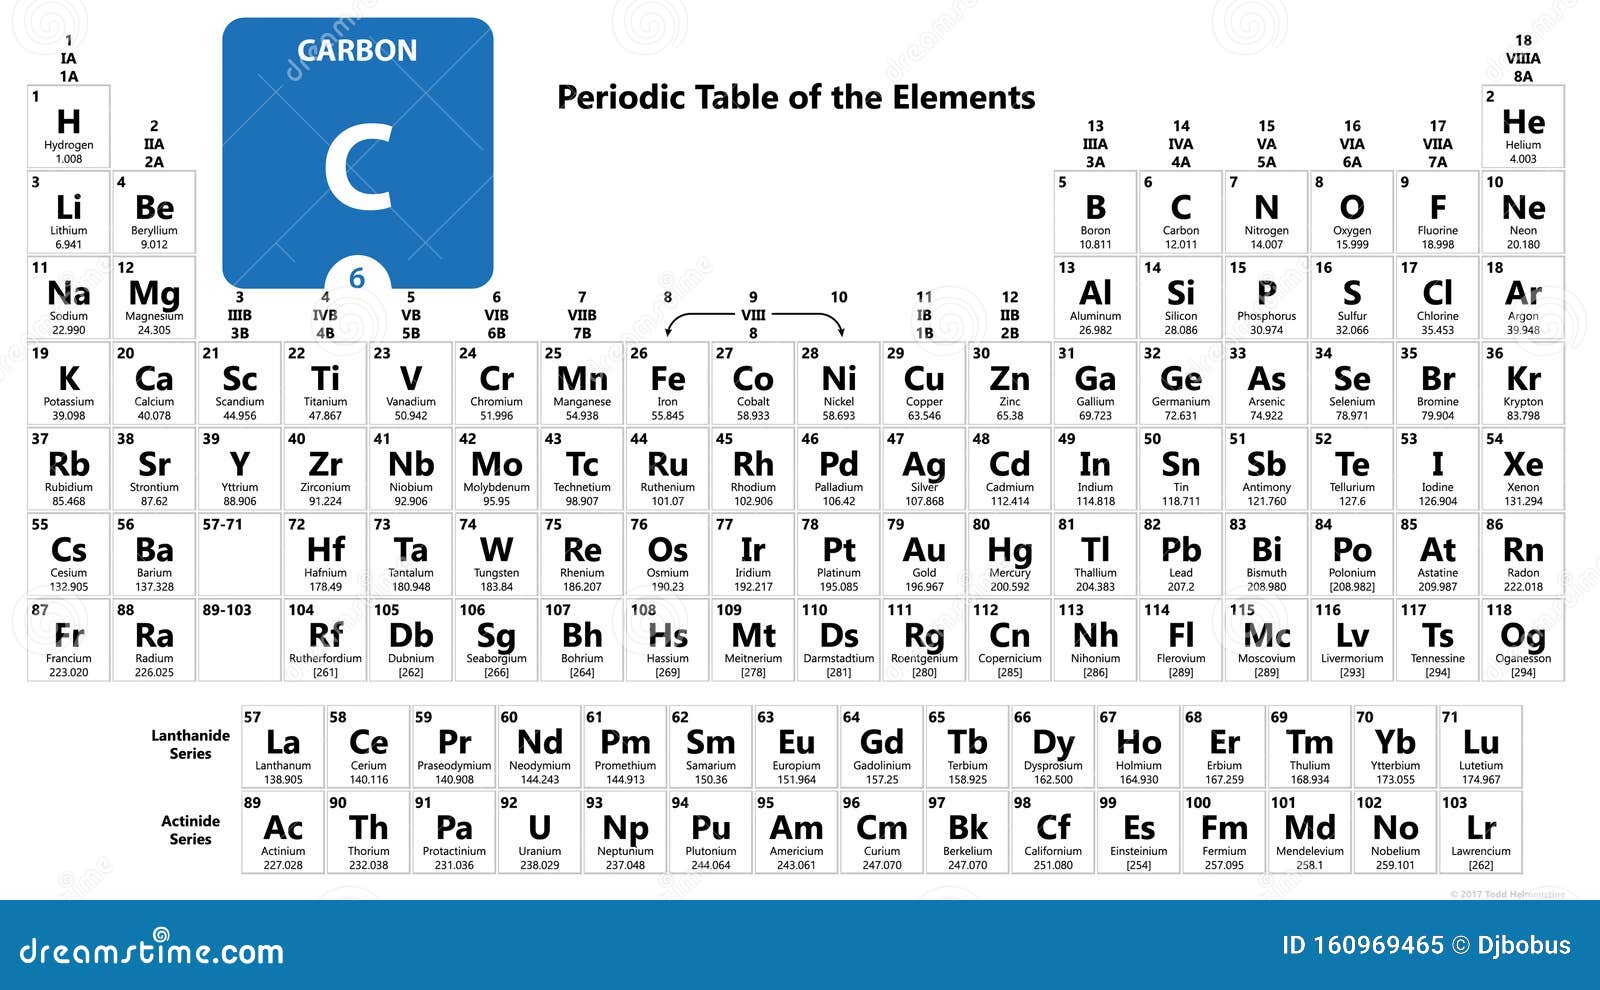 Carbon C Chemical Element Carbon Sign With Atomic Number Chemical 6 Element Of Periodic Table Periodic Table Of The Elements Stock Illustration Illustration Of Experiment